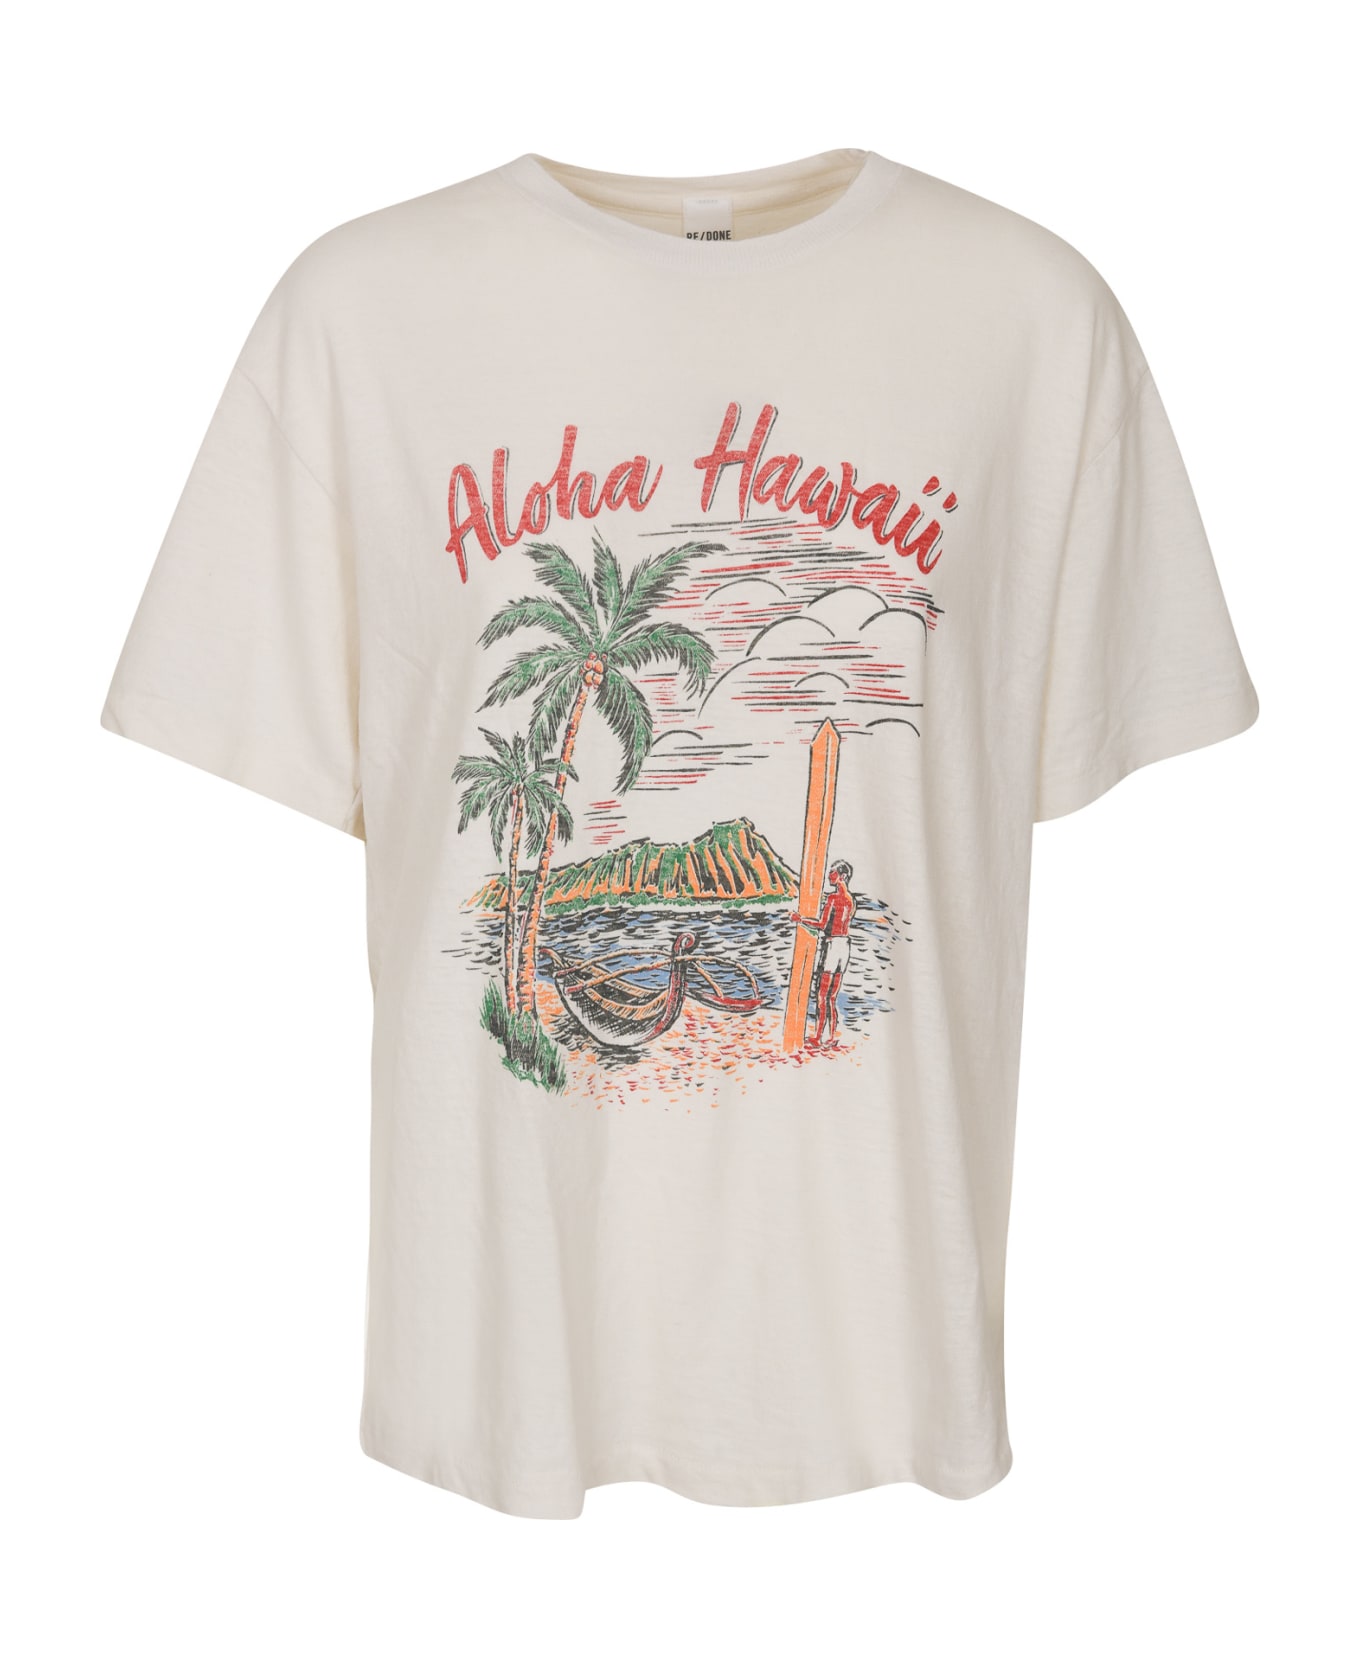 RE/DONE Hawaii Printed T-shirt - Vintage White